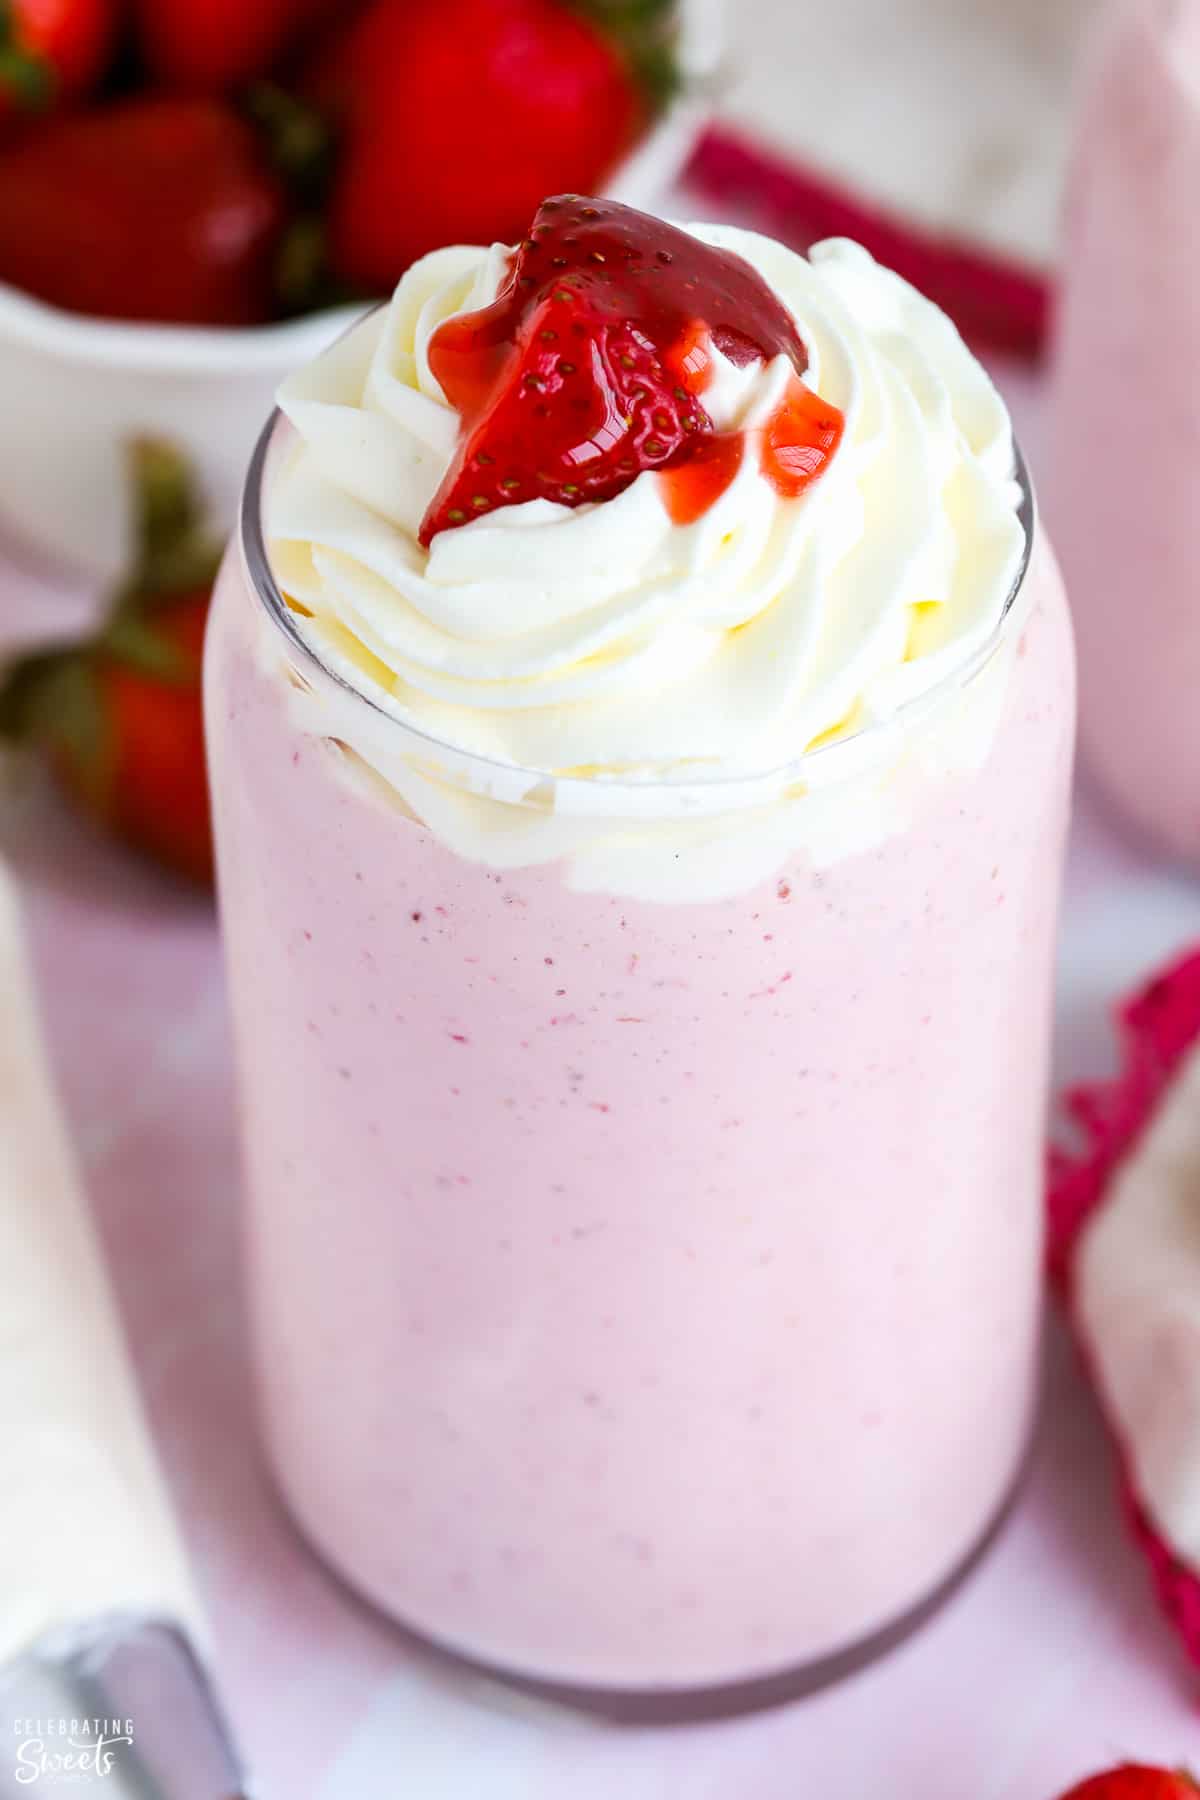 Closeup of Strawberry milkshake topped with whipped cream and strawberries